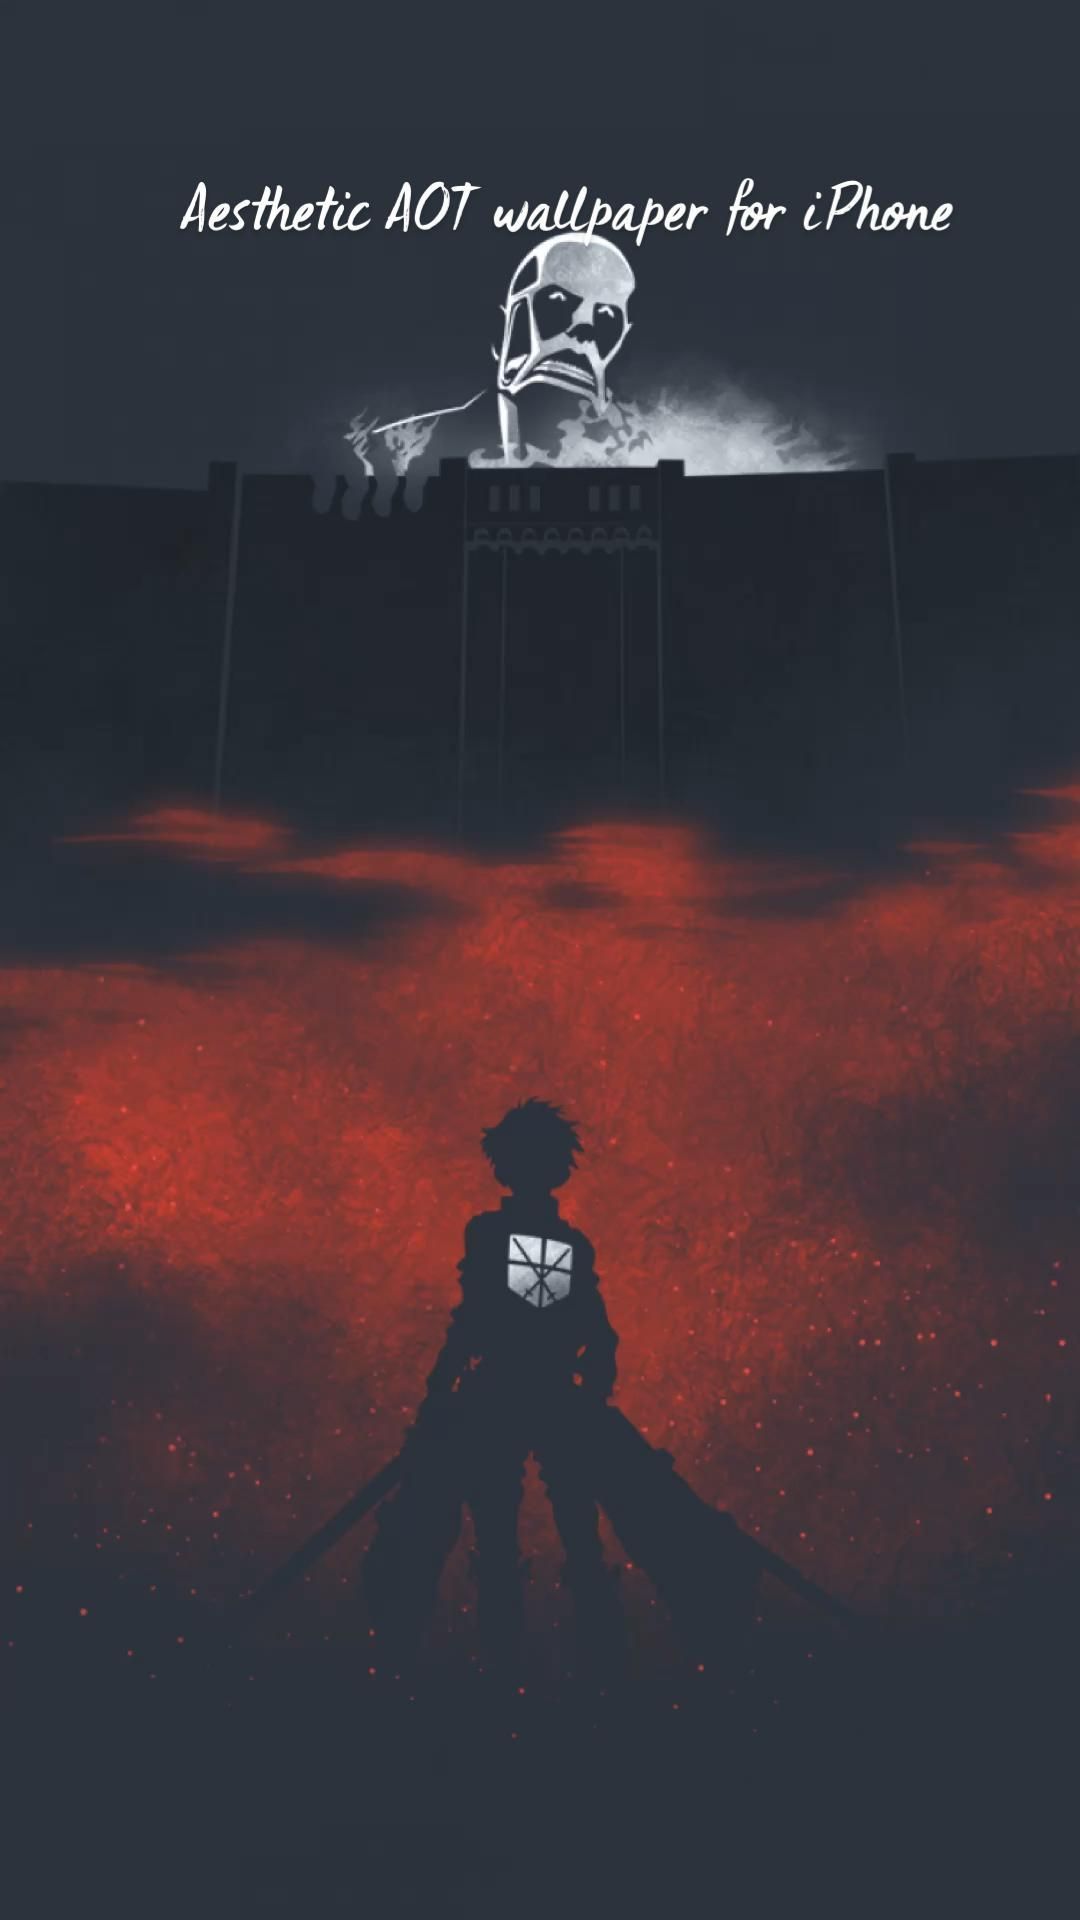 Aesthetic AOT wallpaper for iPhone. Attack on titan anime, Anime wallpaper iphone, Attack on titan